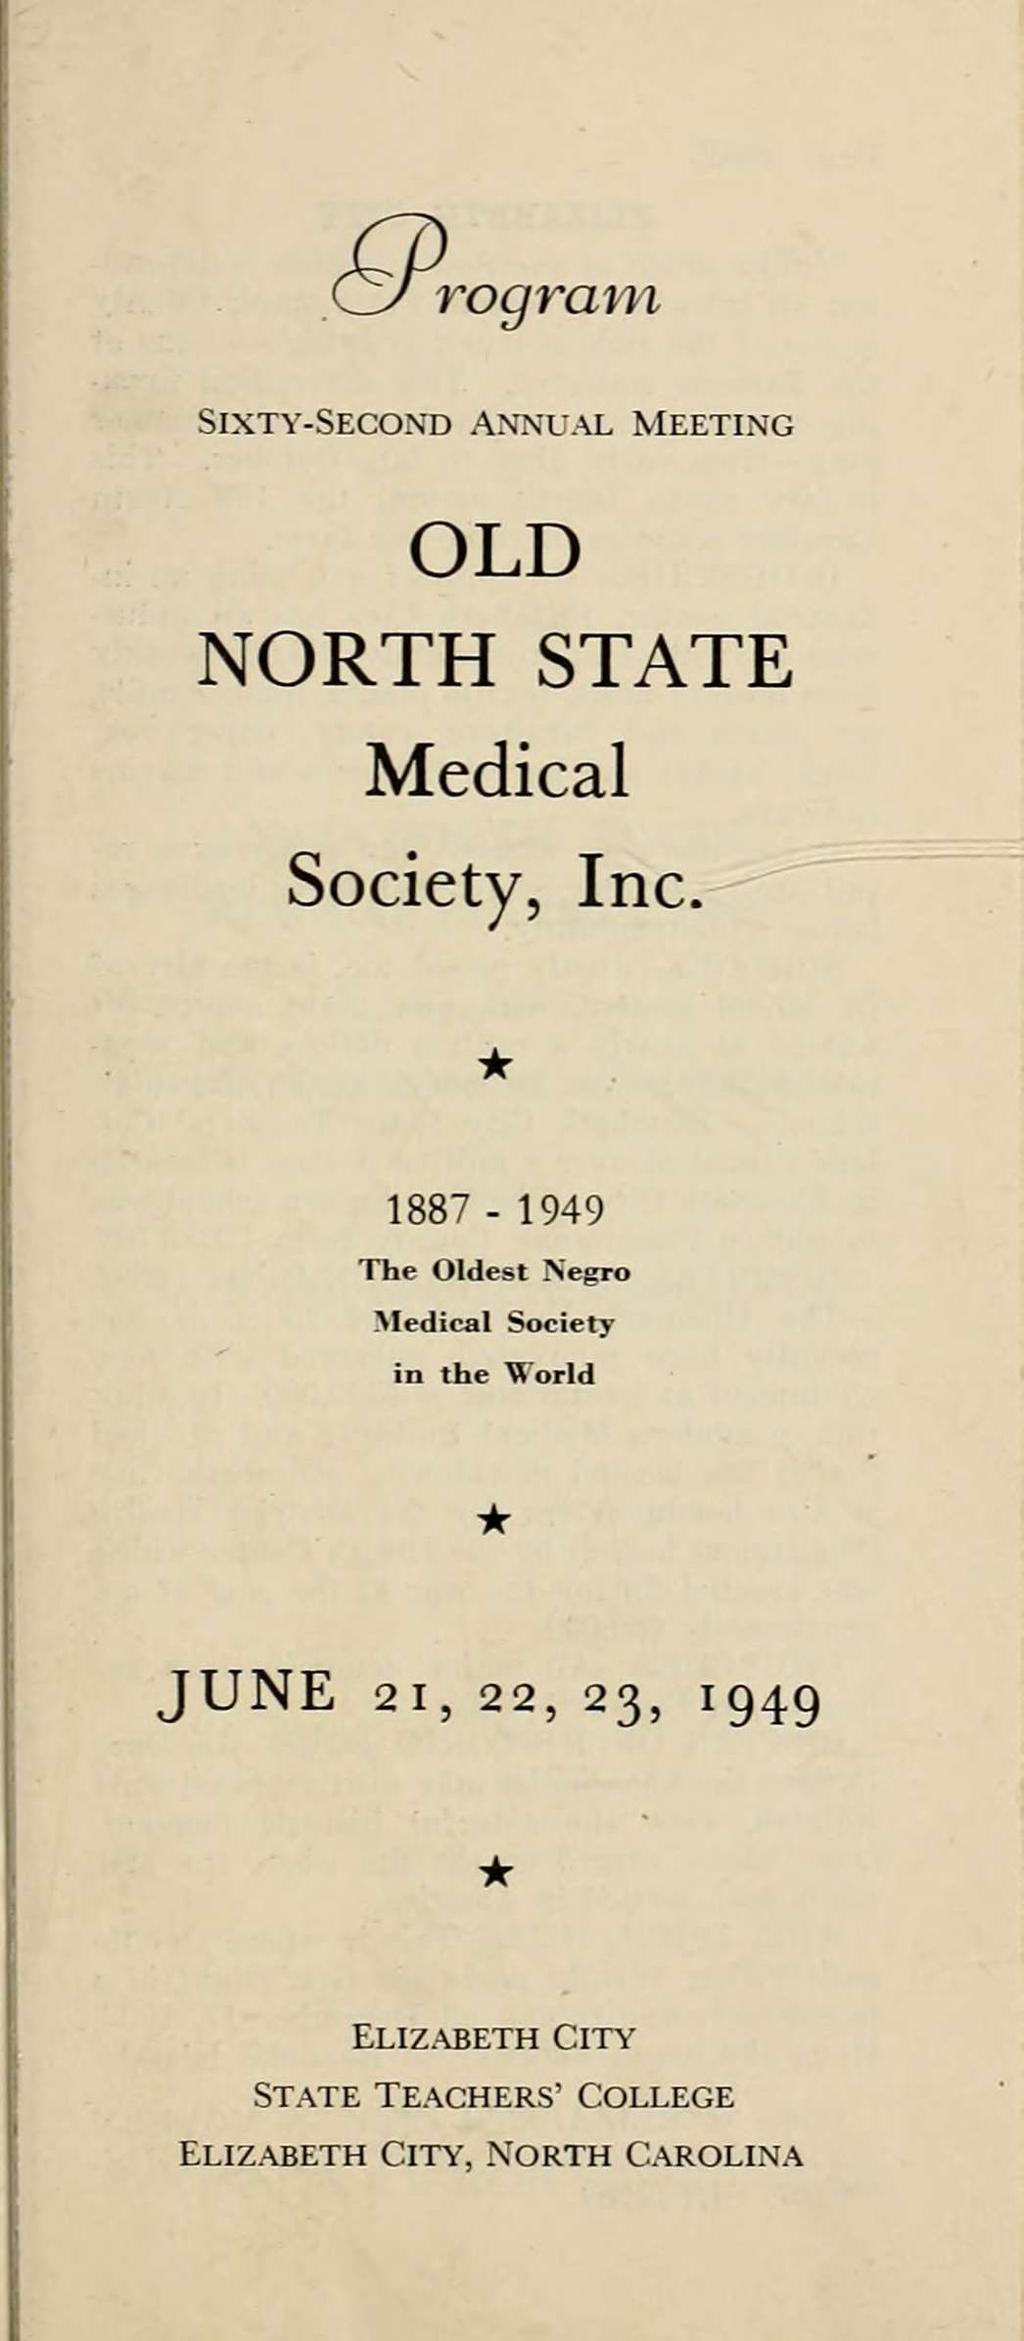 rograni SIXTY-SECOND ANNU.\L MEETING OLD NORTH STATE Medical Society, Inc.